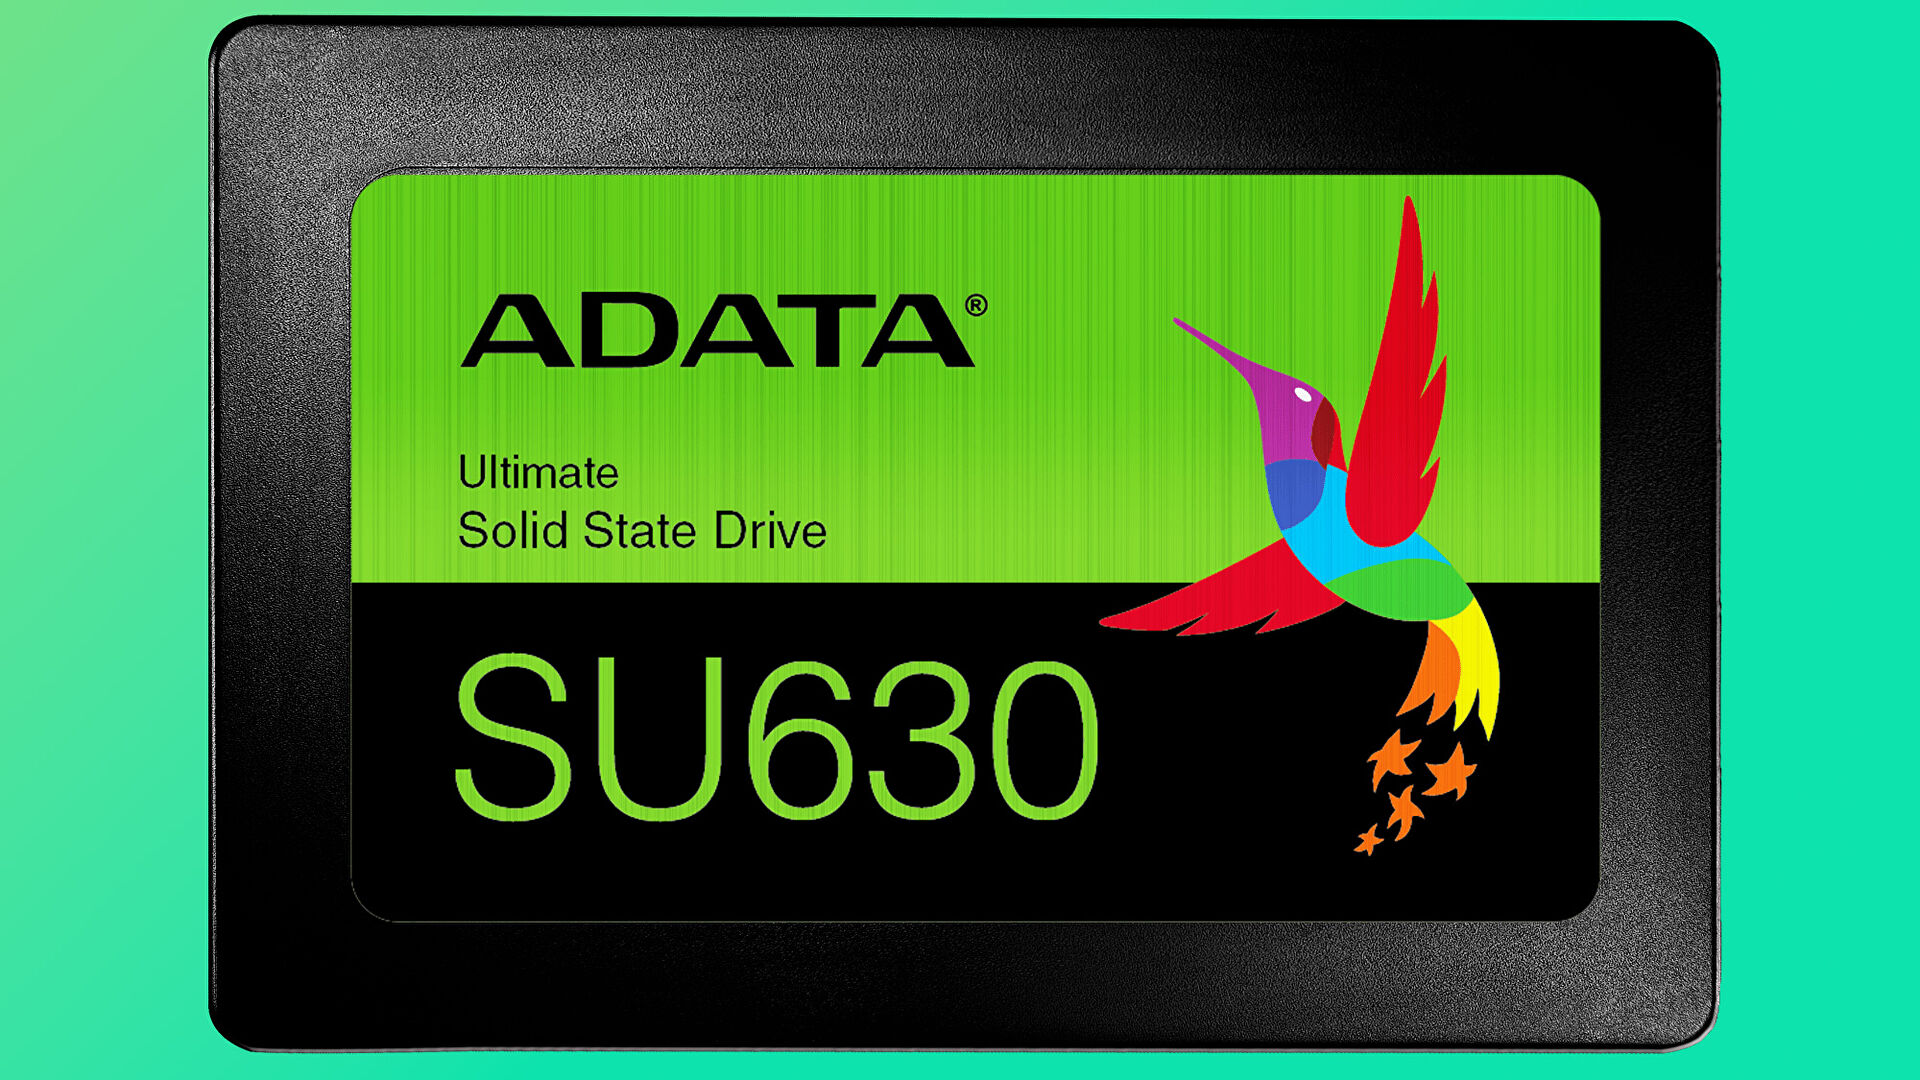 Revitalise an old PC with a 480GB SSD for less than £30